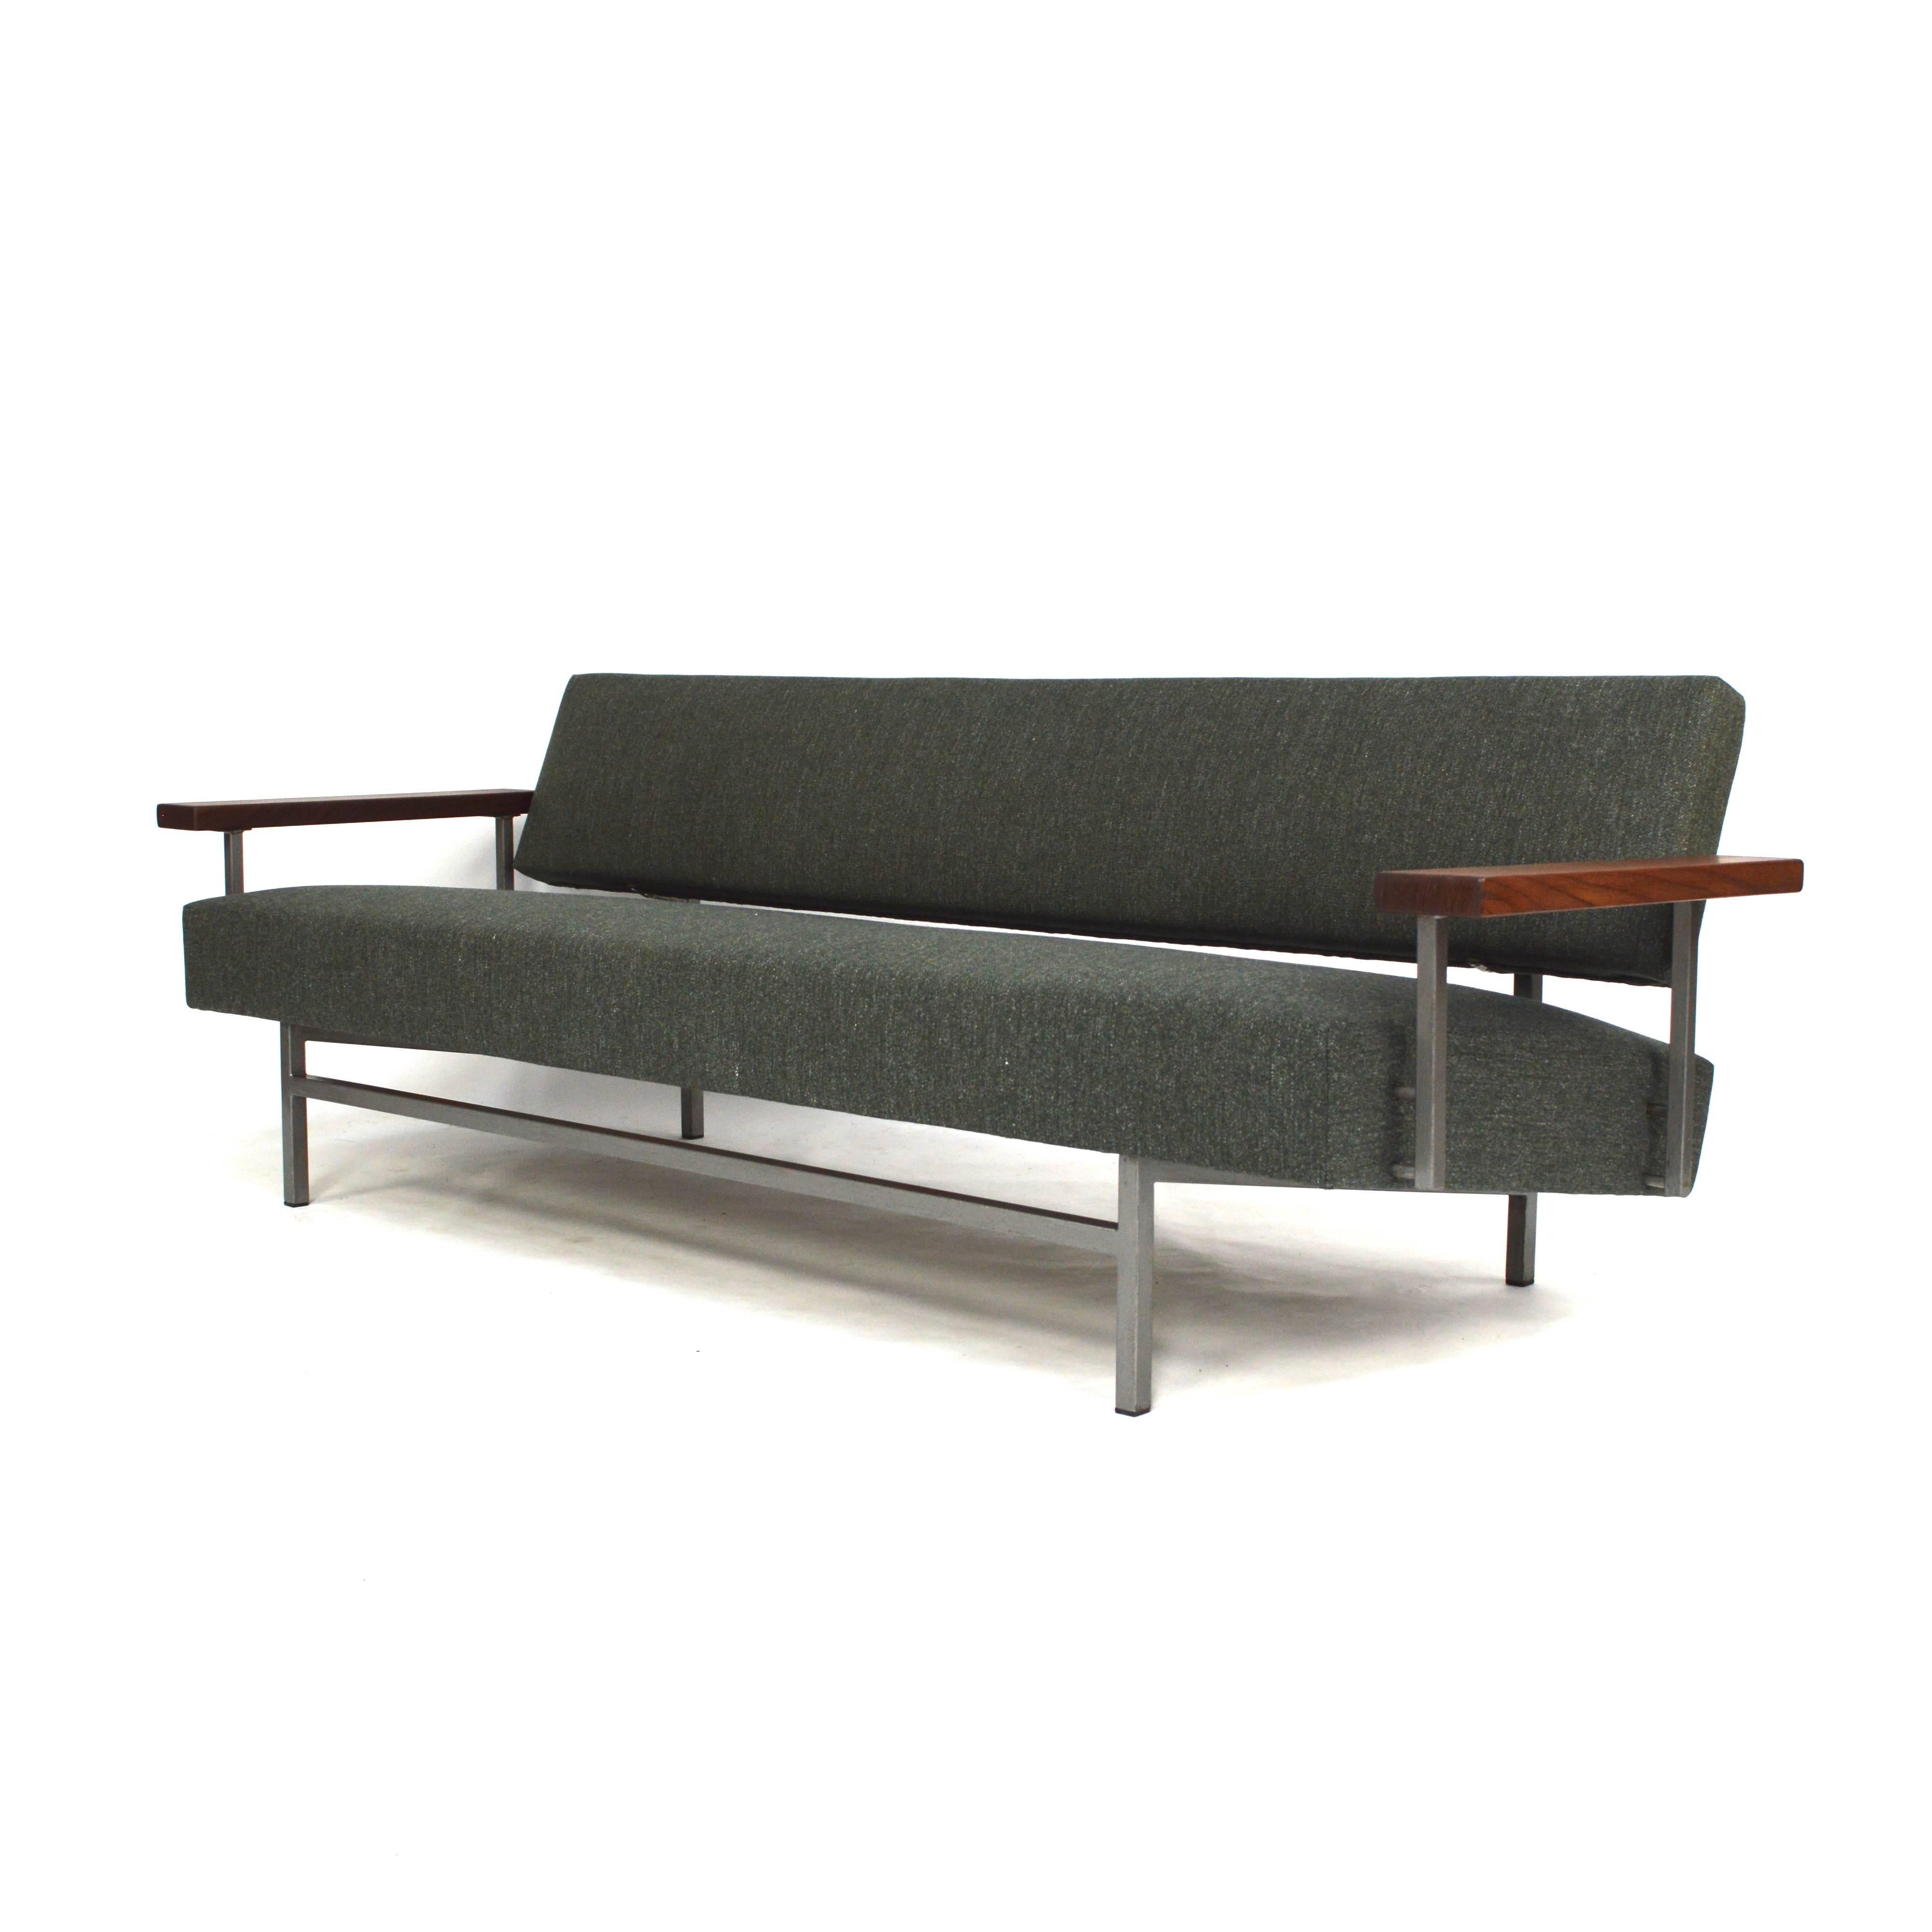 Mid-Century Modern Daybed Sofa by Rob Parry for Gelderland, 1950s